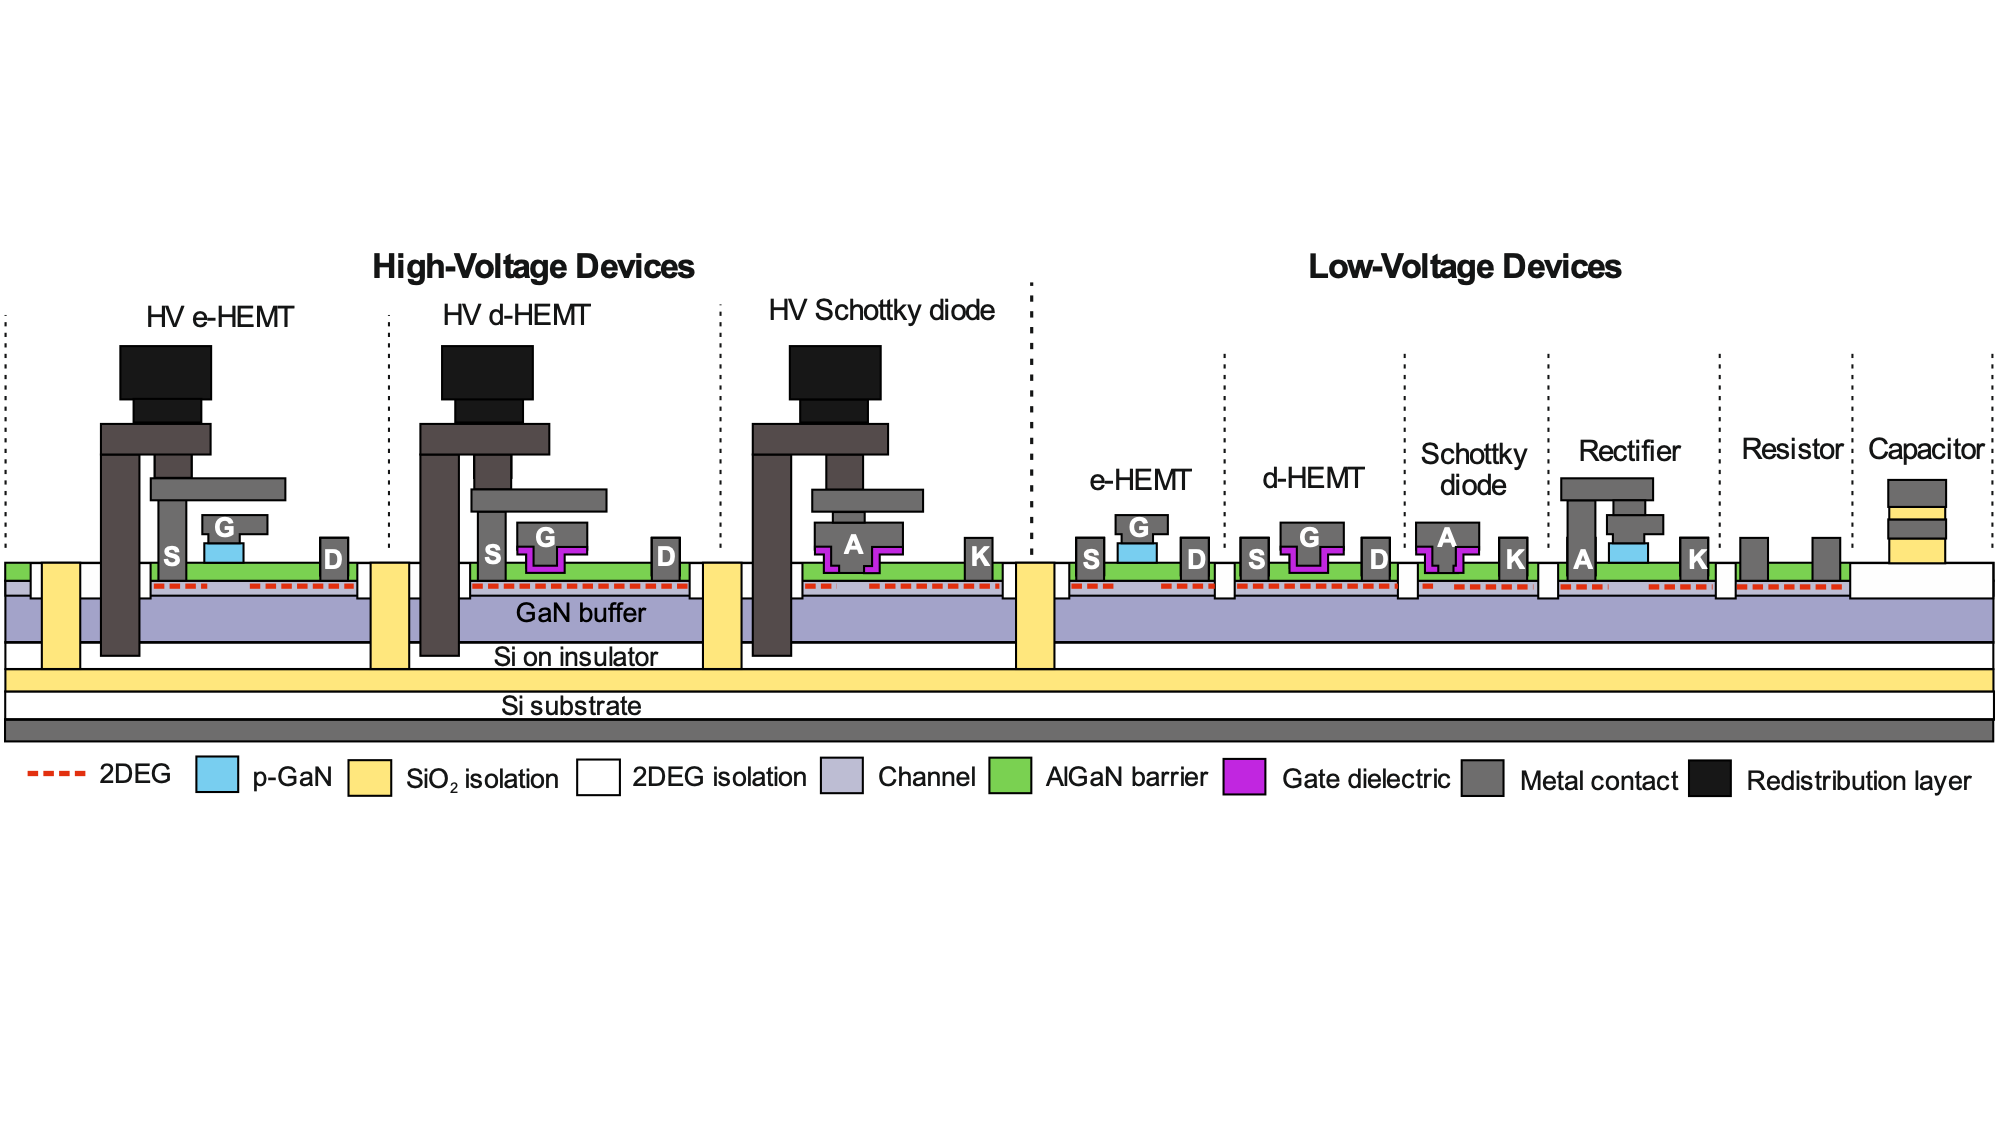 Schematic cross-section of IMEC 200V GaN-on-SOI Power IC technology and components. The process features monolithic co-integration of E/D mode HEMTs, Schottky diodes, resistors, capacitors, and includes advanced process modules (deep trench isolation, substrate contact, redistribution layer...)